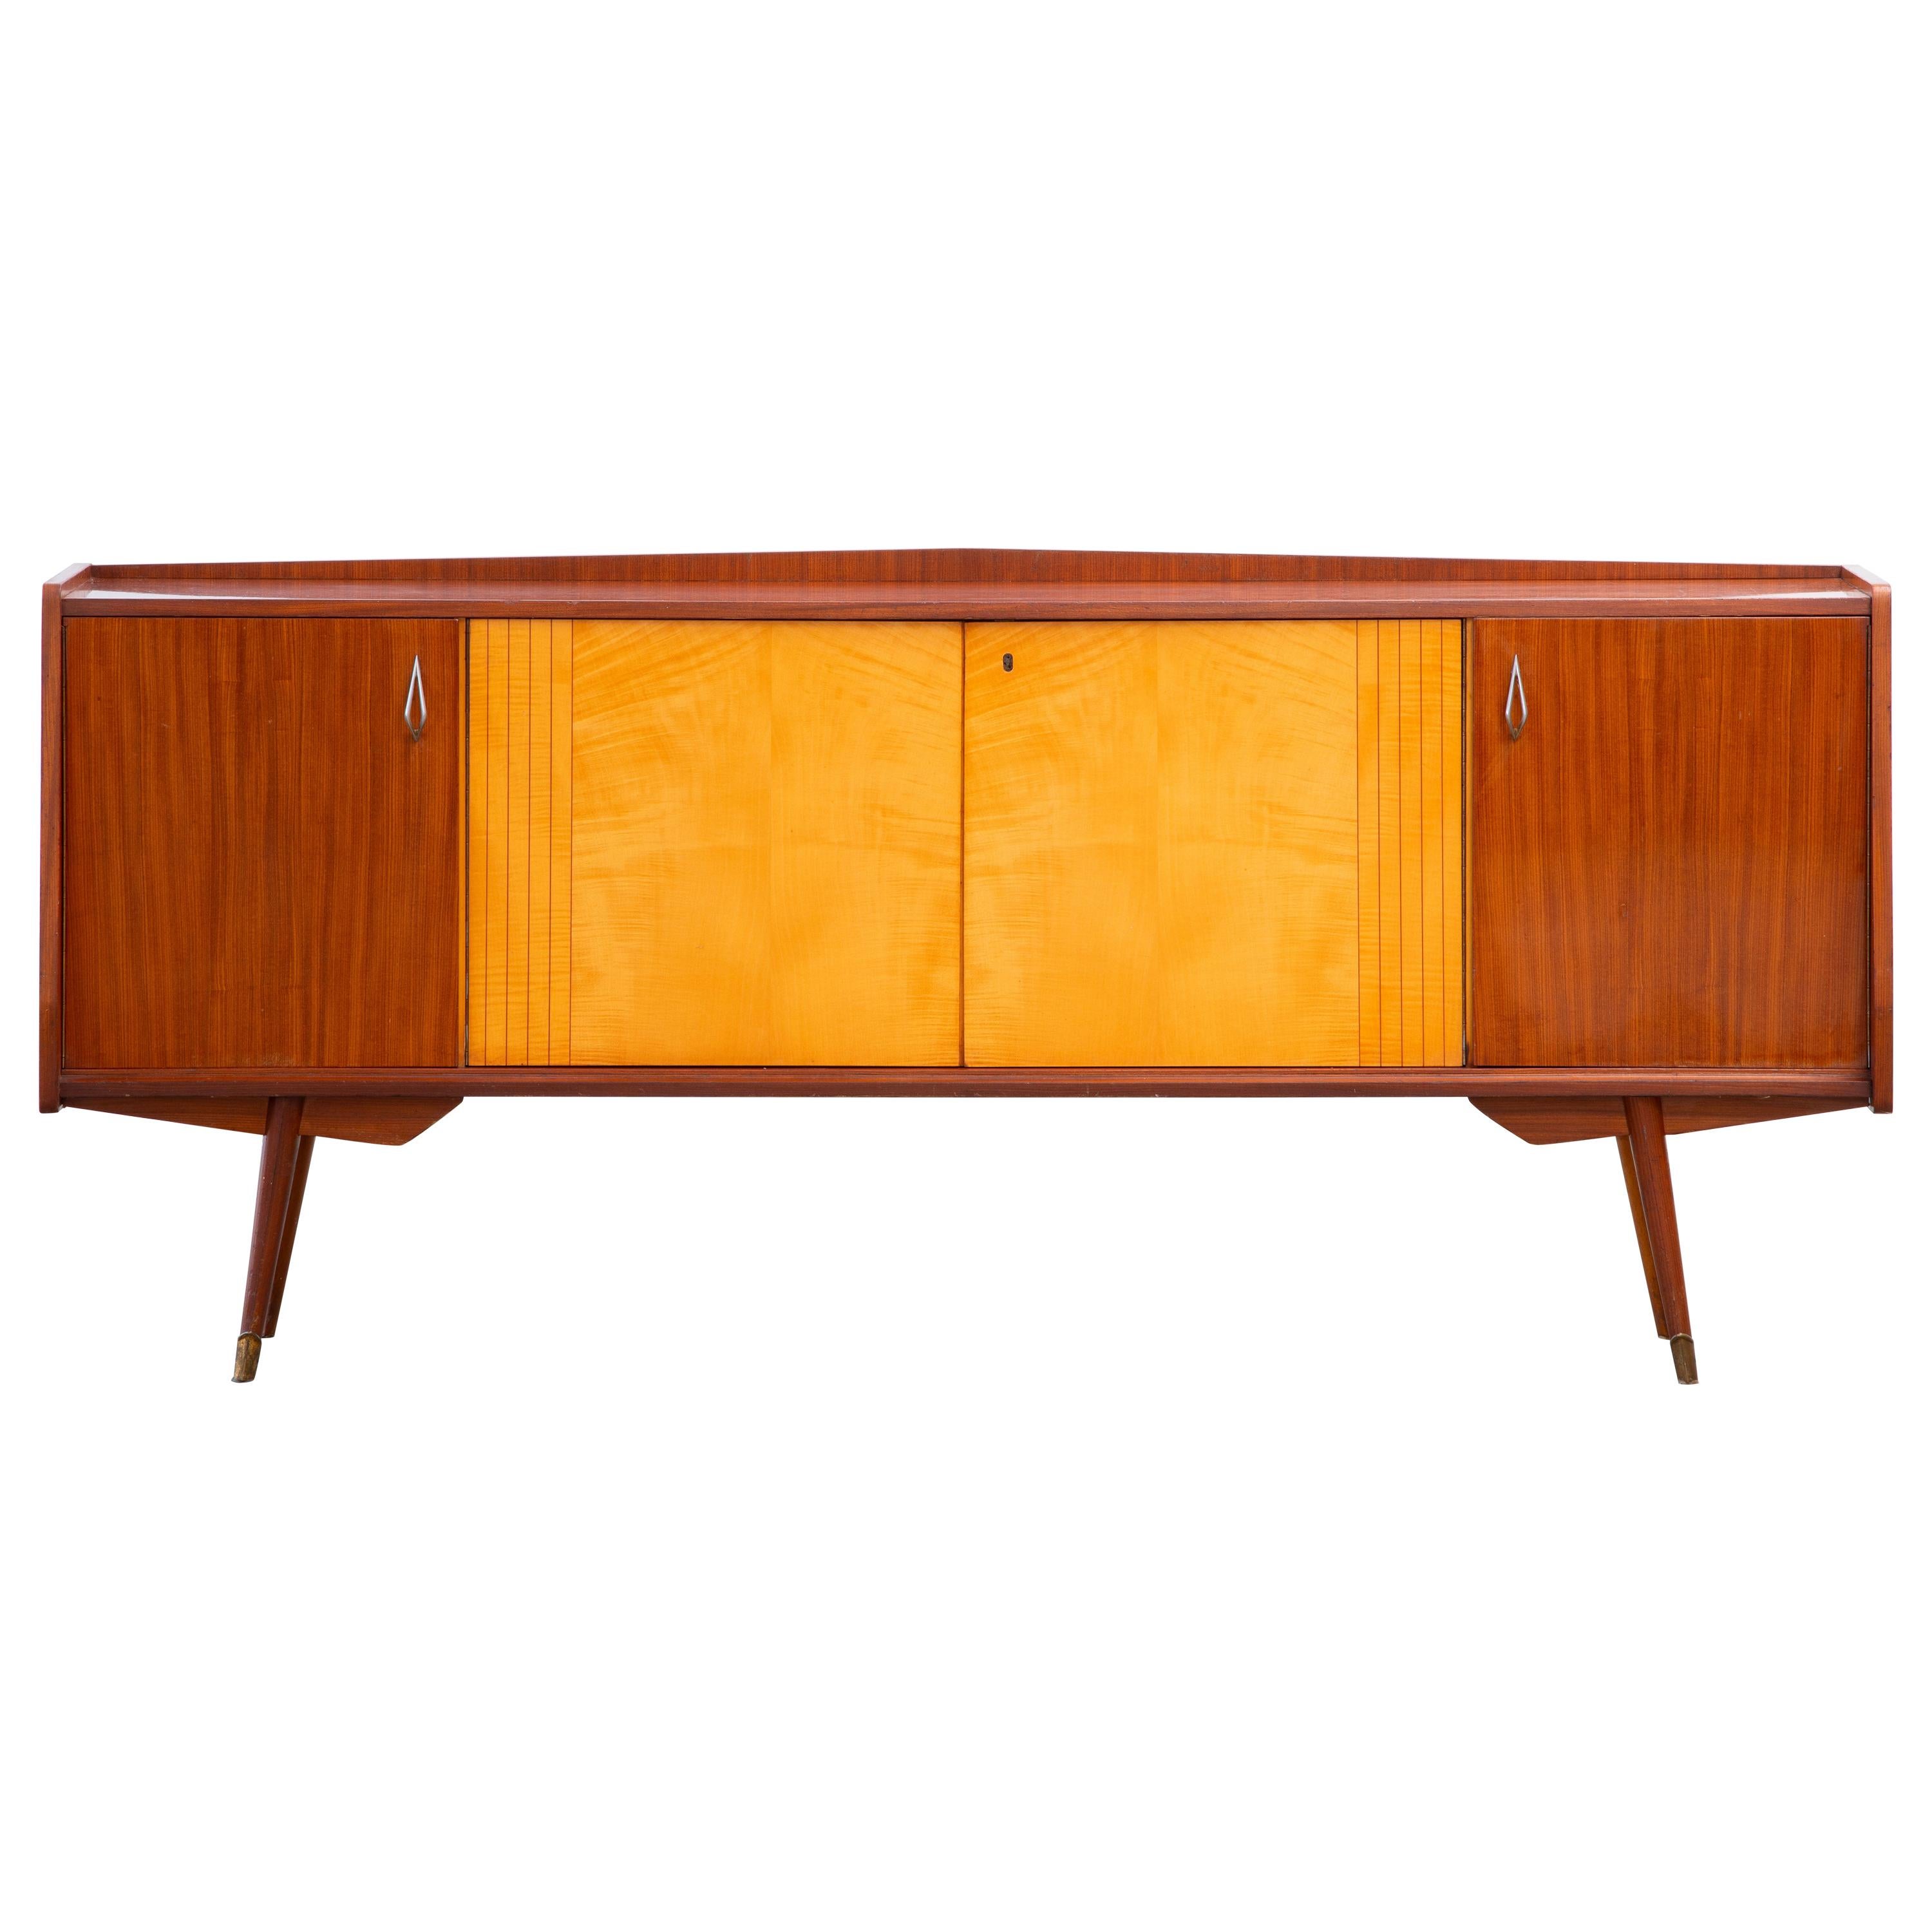 1950 French Credenza in Walnut and Maple